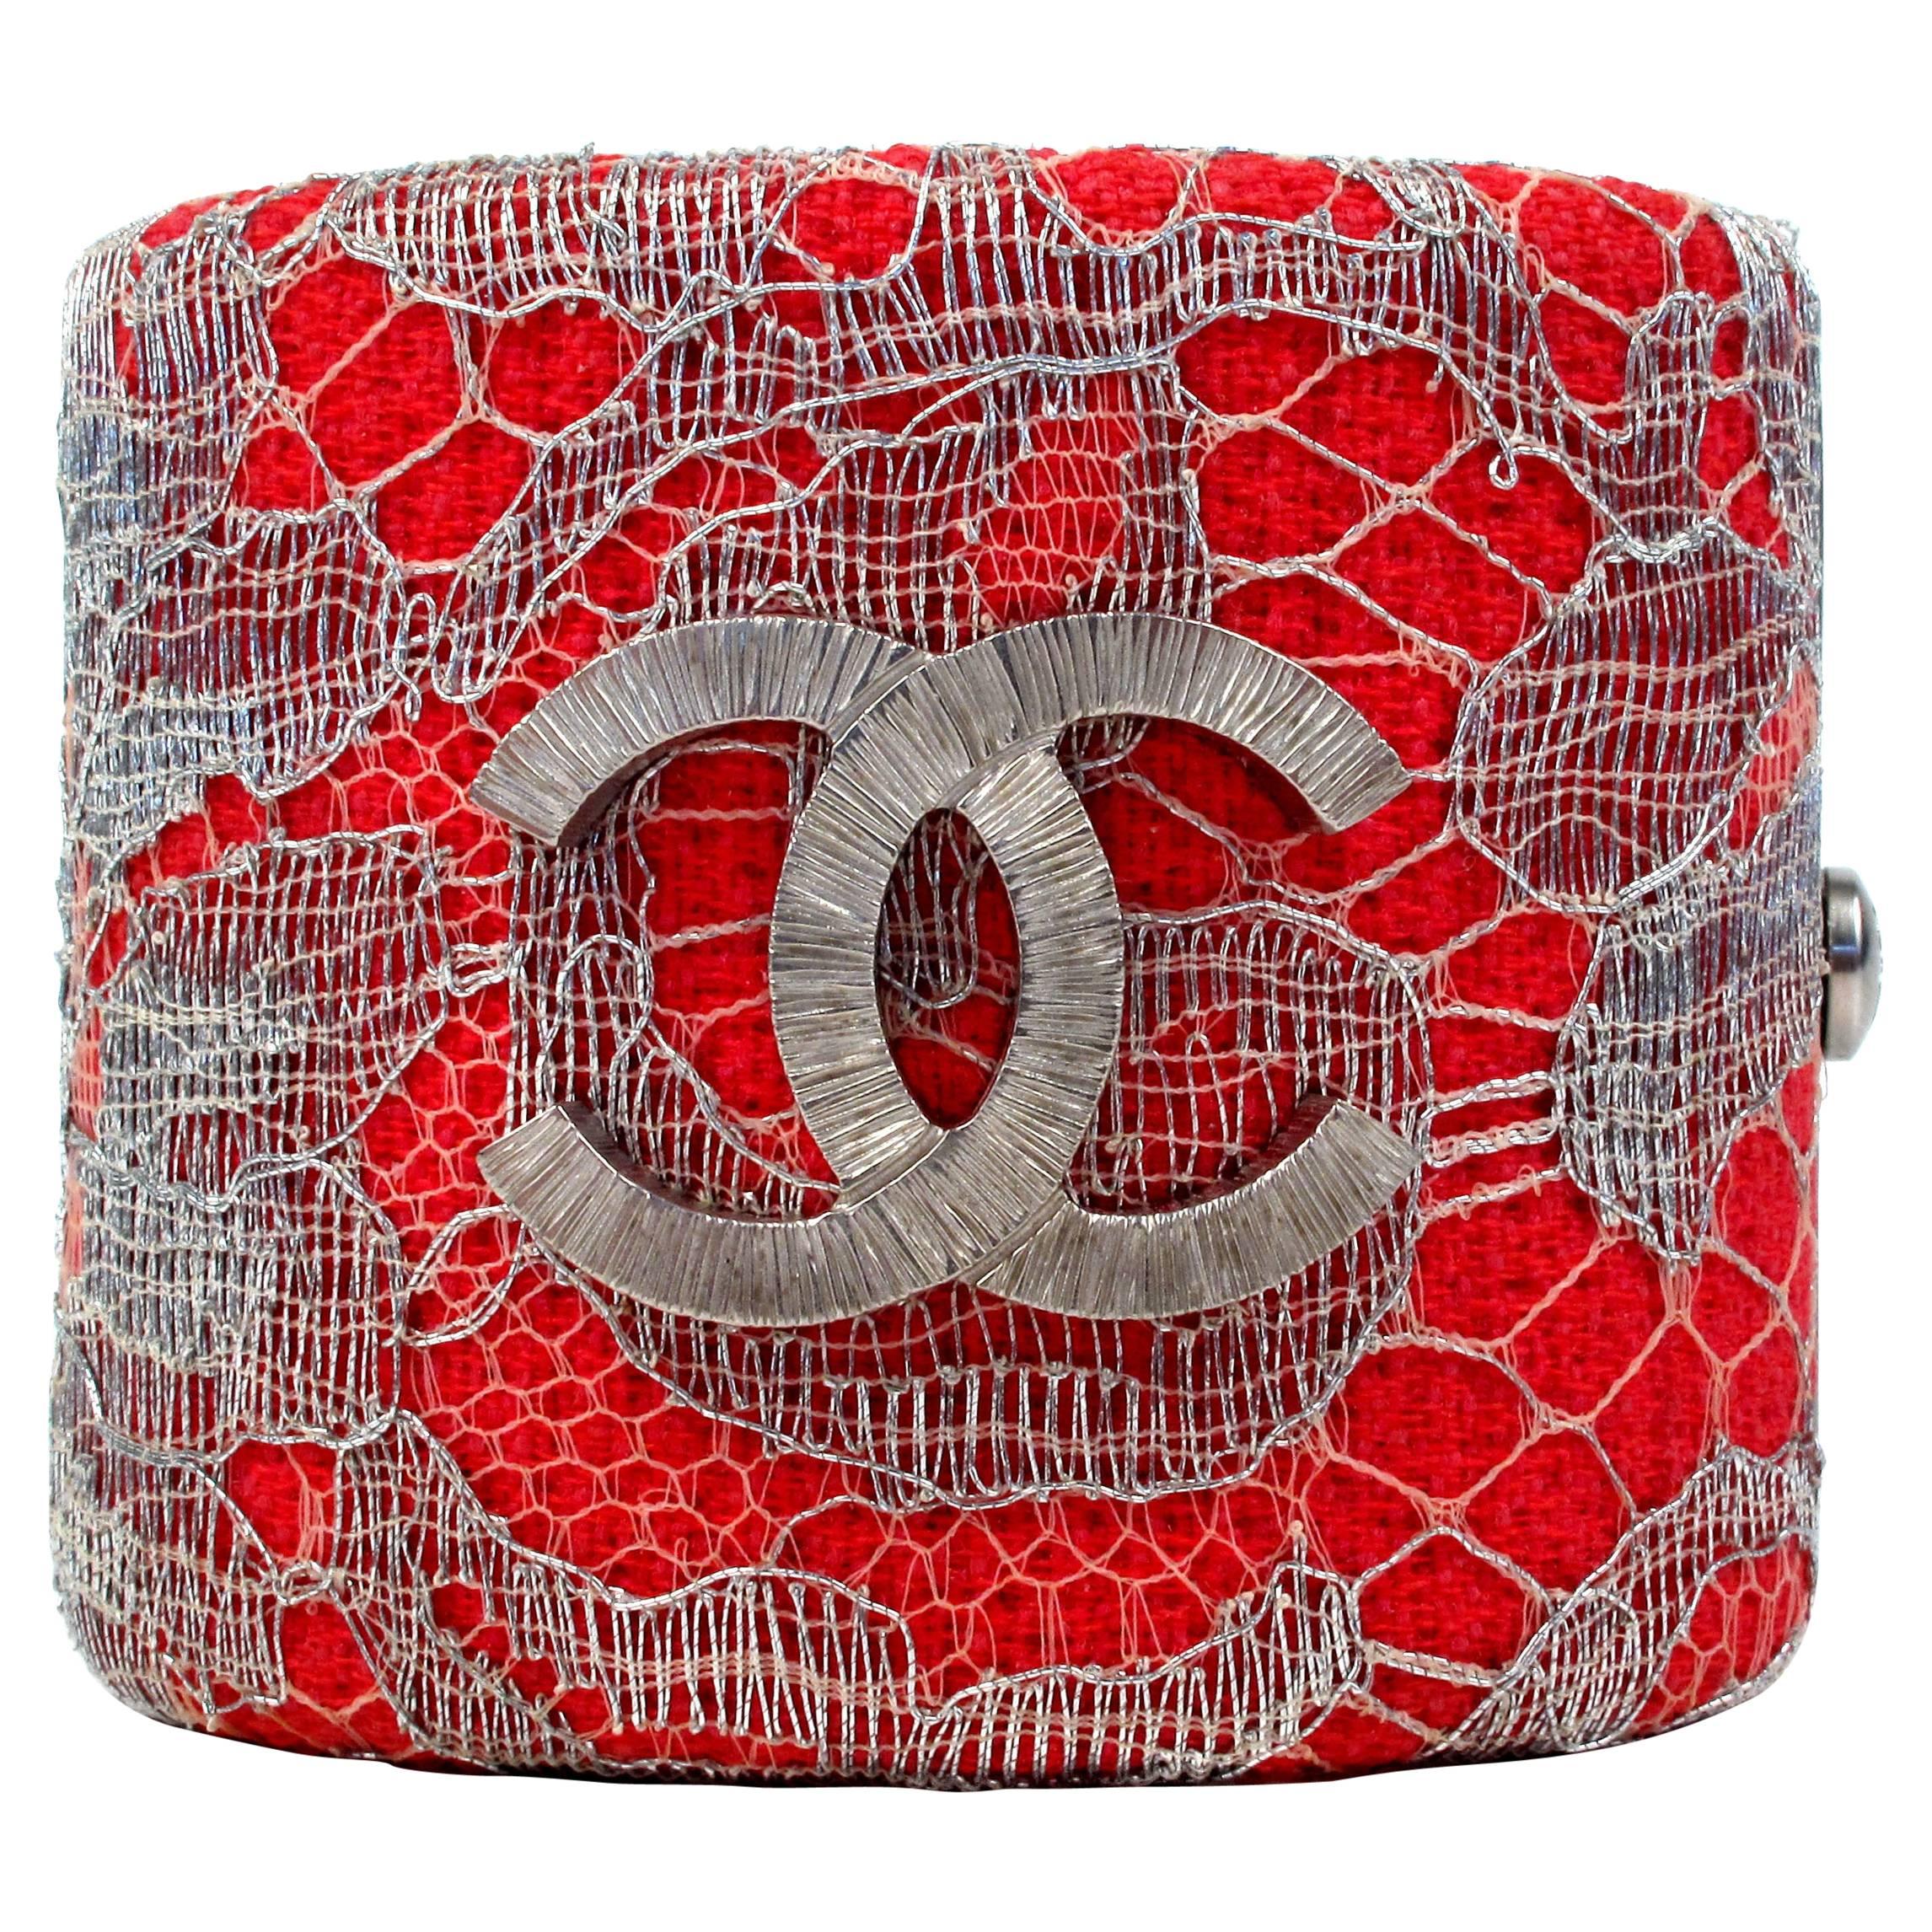 Chanel Bracelet - New - Pink Wide Tweed Lace Bangle Cuff - Silver CC 2014 14P